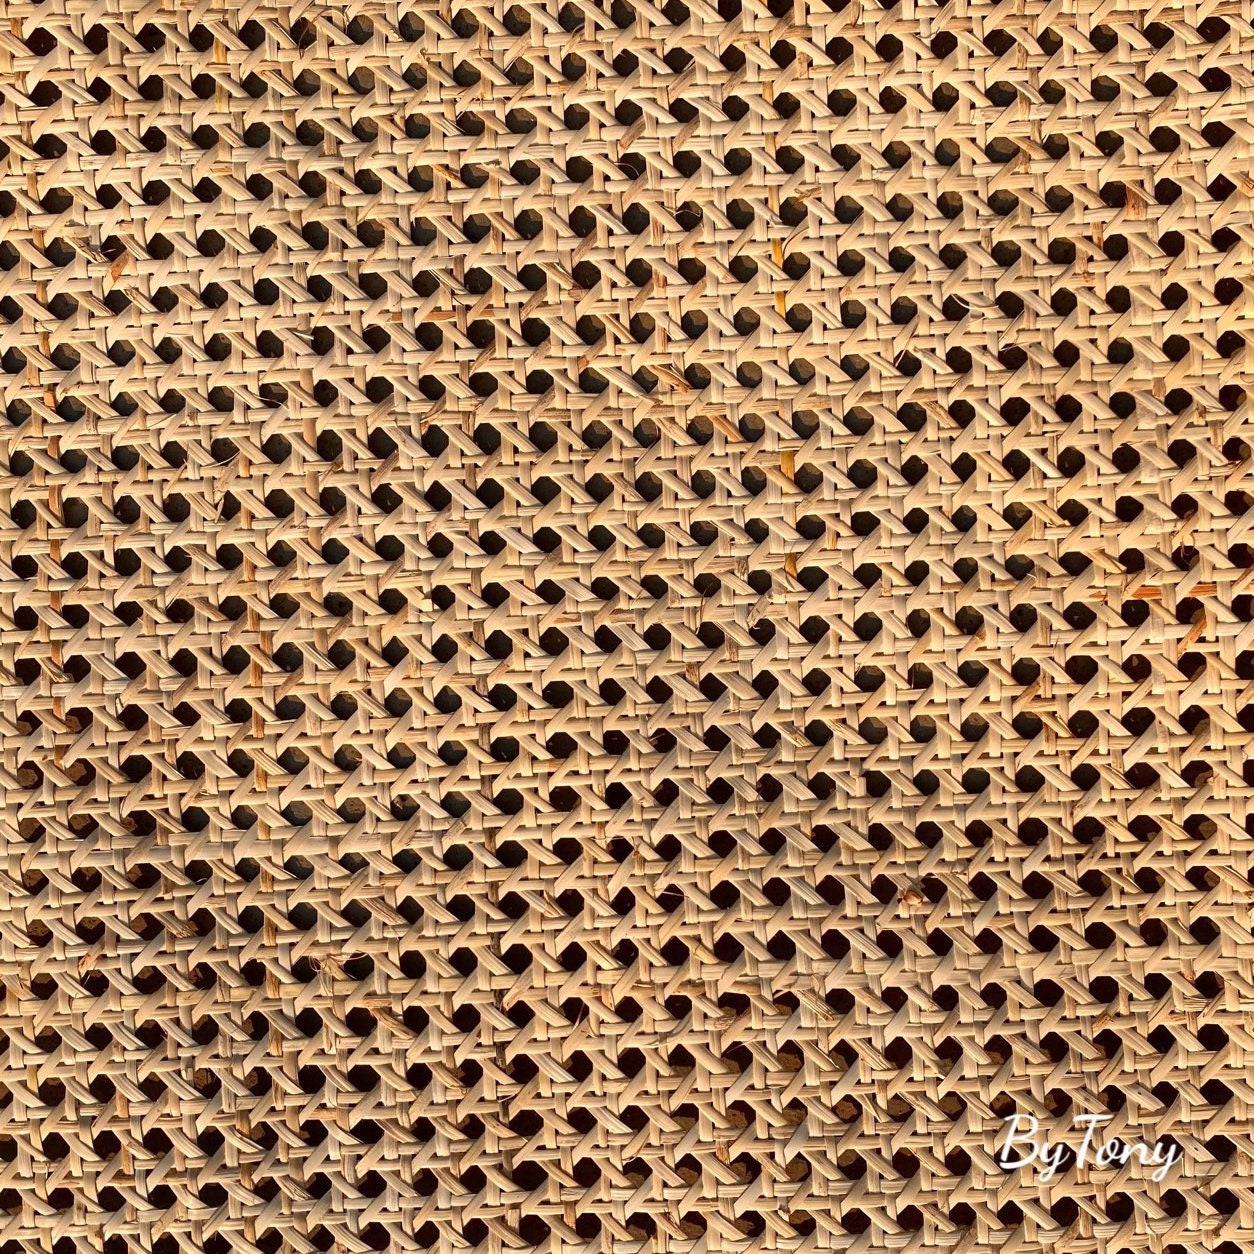 Fule Rattan Mesh Roll Sheet Webbing Caning Material for Chairs Kit, for  Caning Projects Pre Woven Open Mesh Cane for Cabinet Bed Chair Repair Caning  Material DIY Supplies(Multi-size Options) 